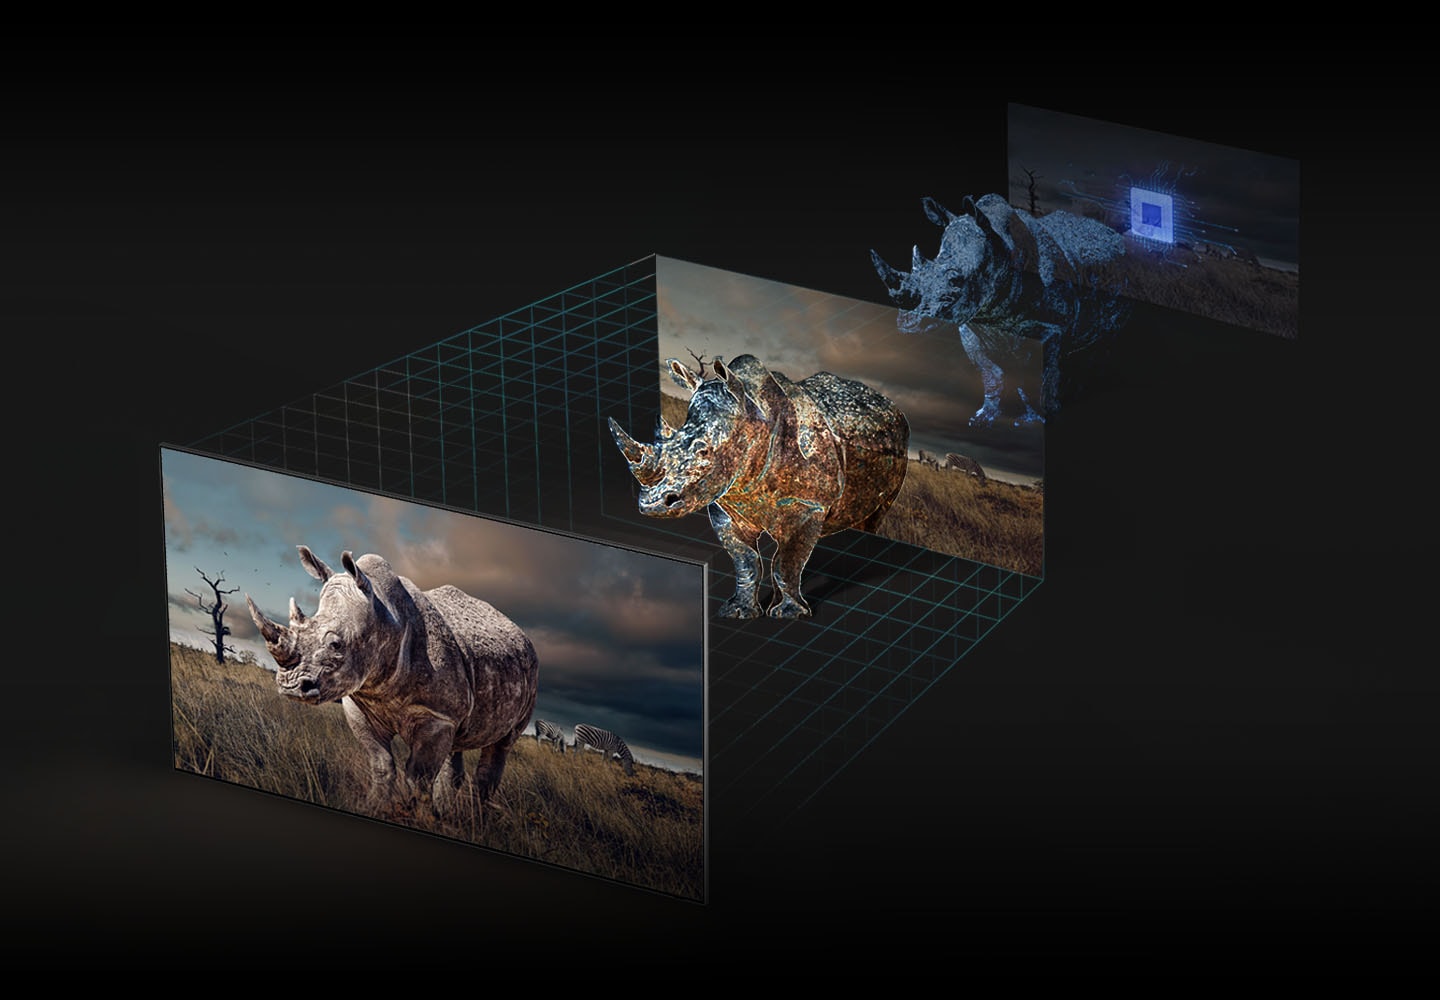 The 3 steps to projecting a life like a rhinoceros is exhibited using Real Depth Enhancer technology.